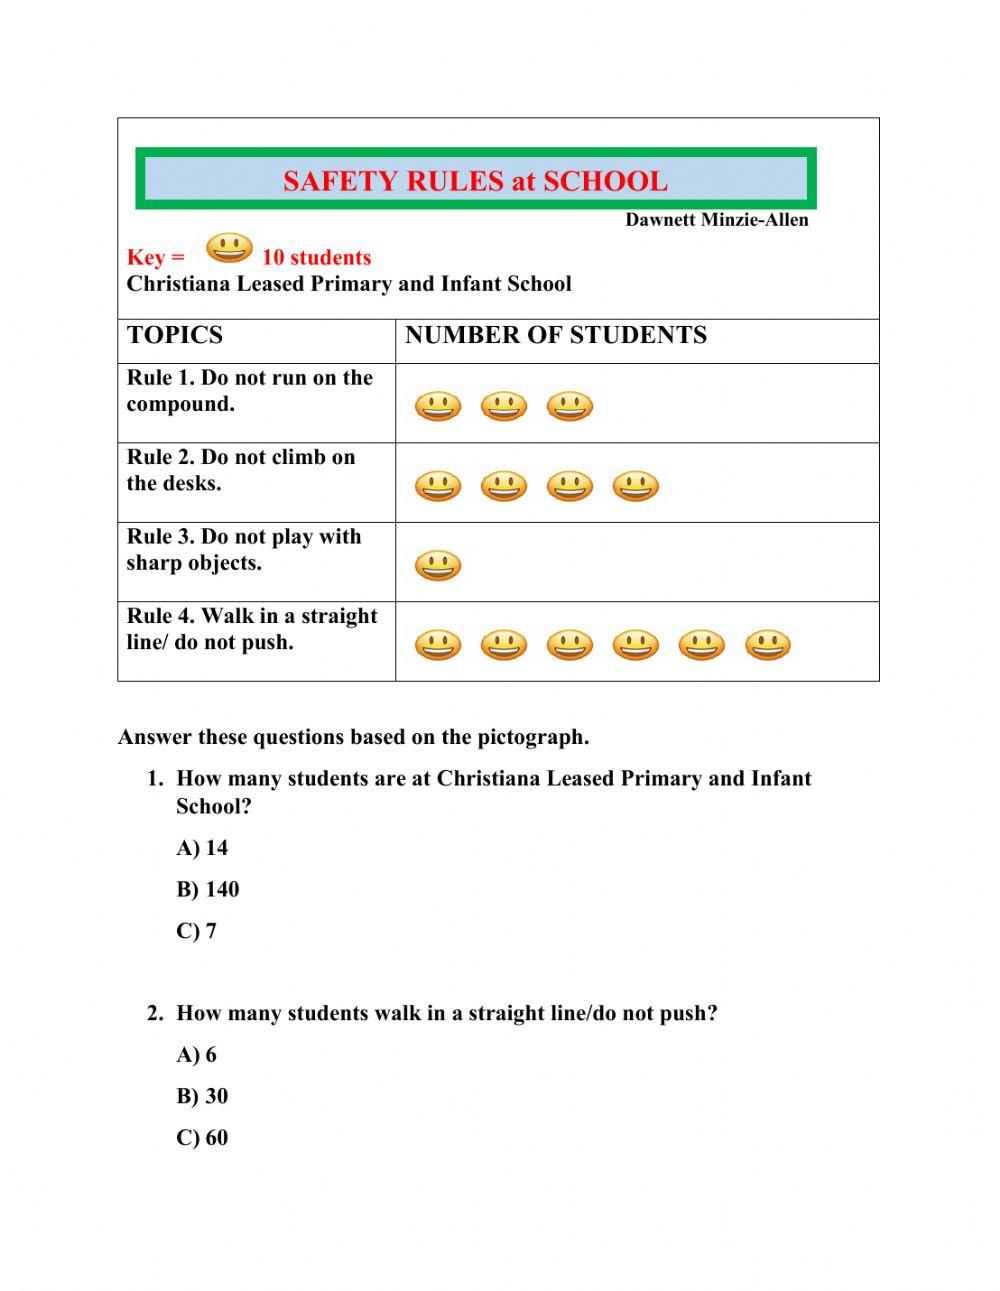 Safety at School Pictograph